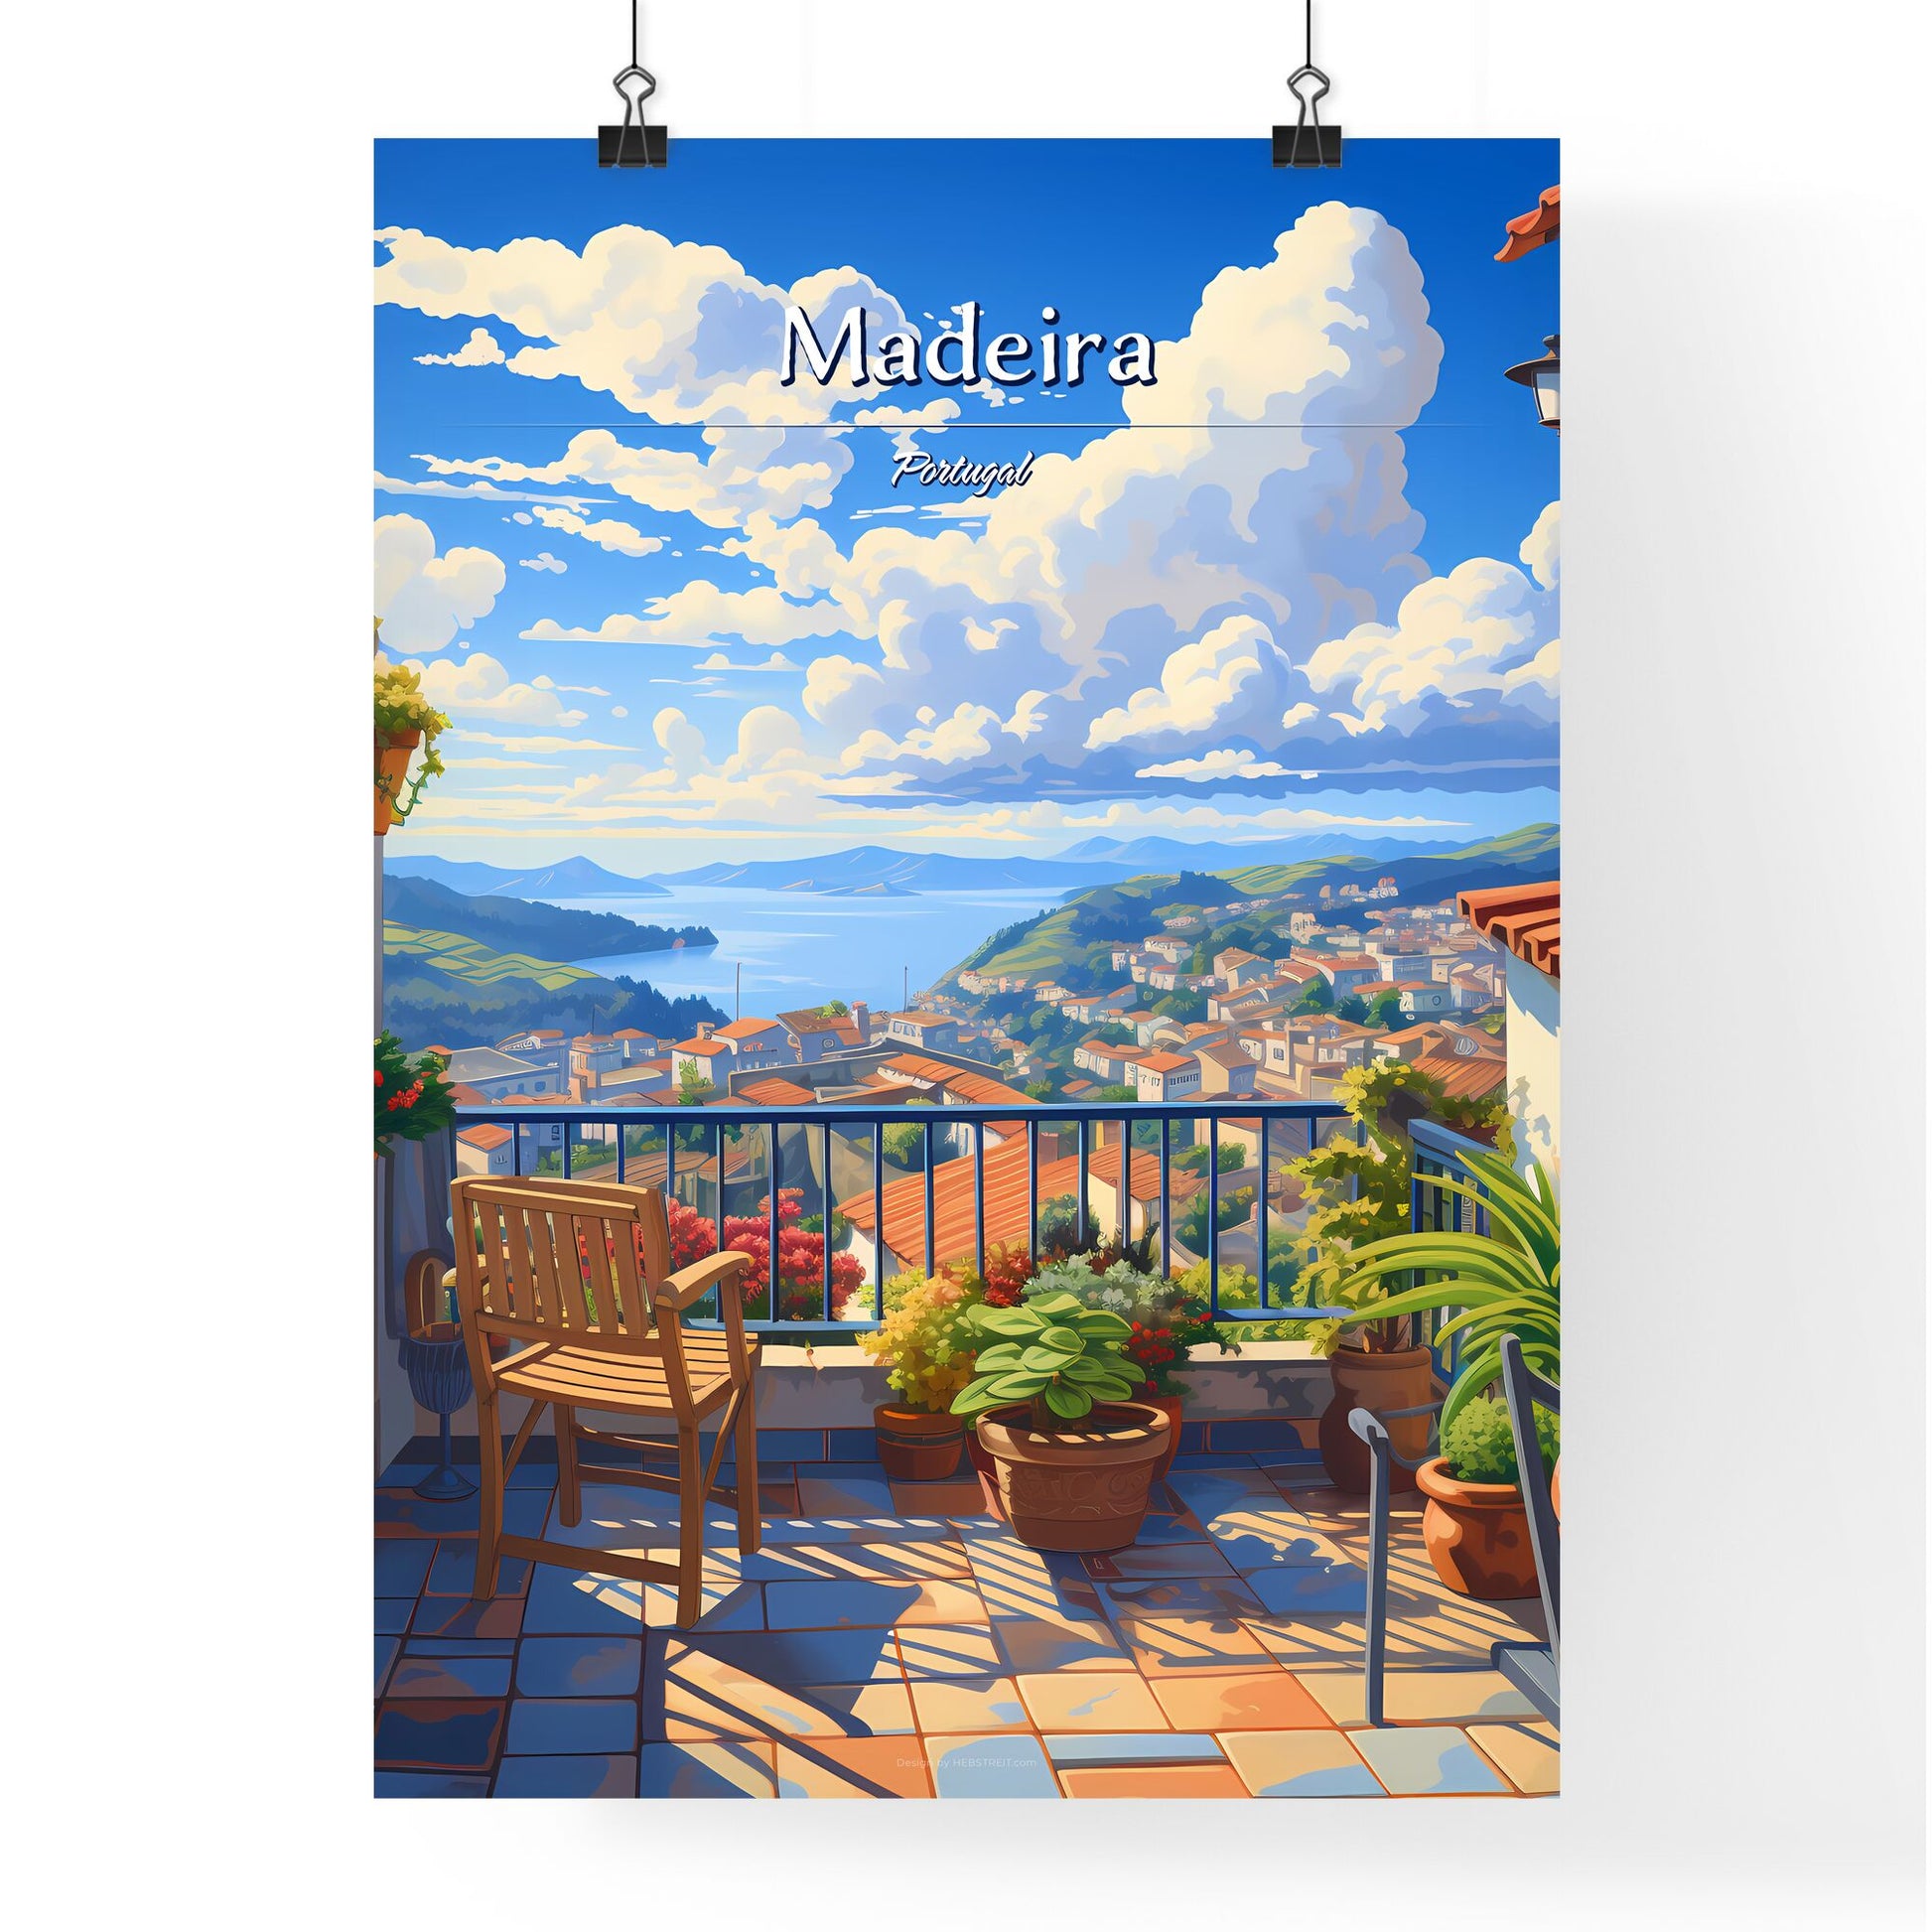 On the roofs of Madeira, Portugal - Art print of a person standing next to a yellow van in the snow Default Title